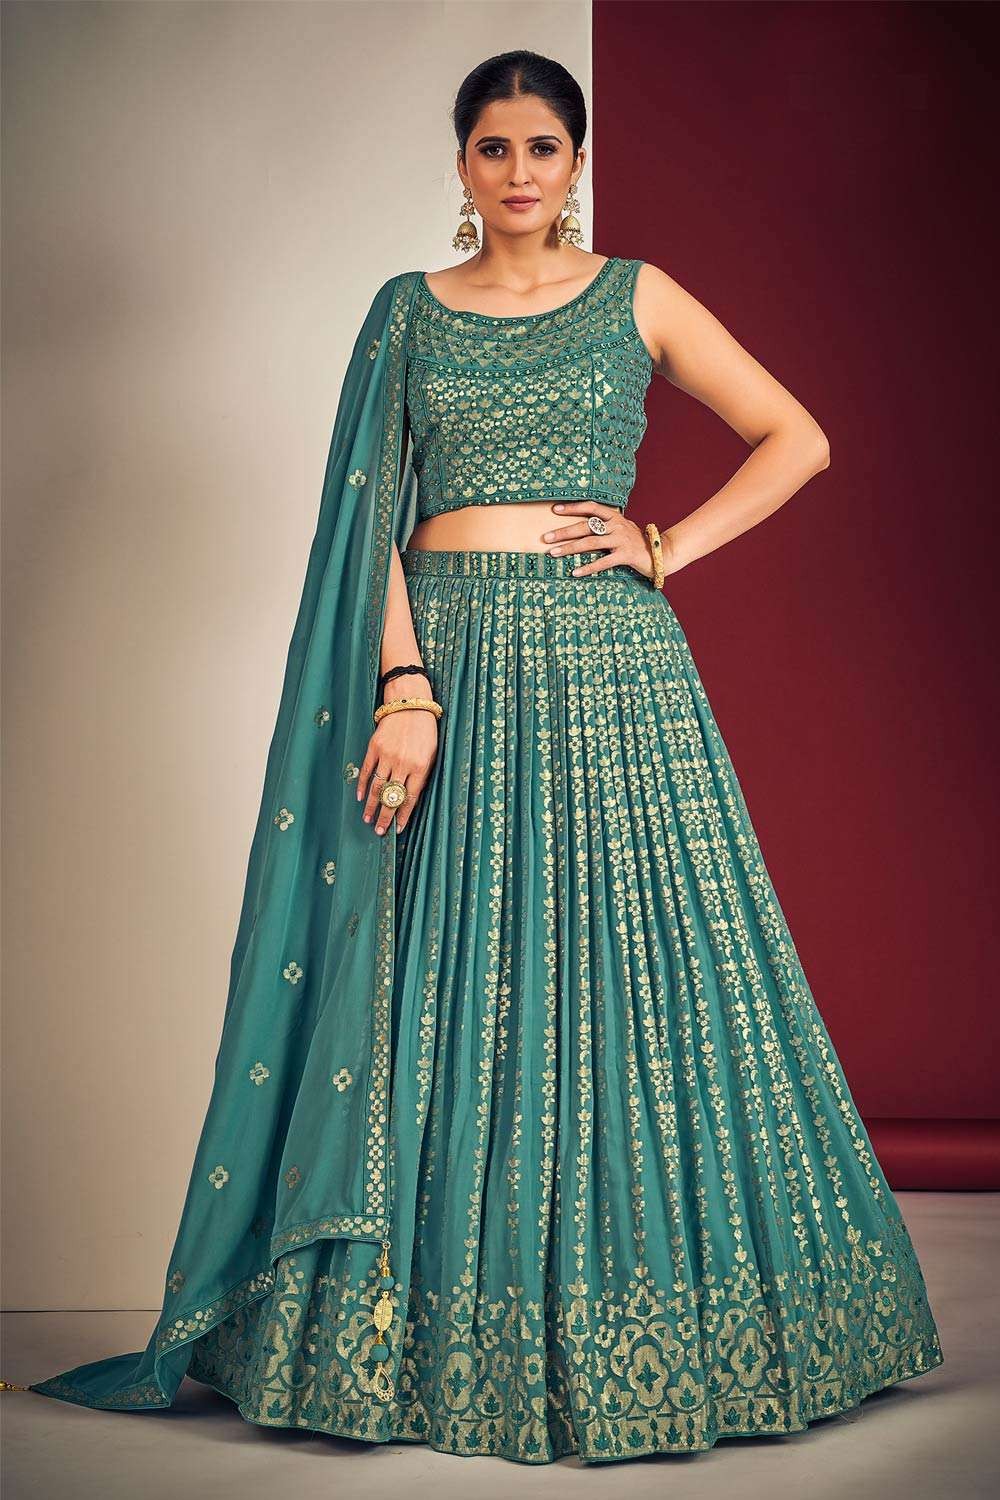 Teal Blue Color Bridal Lehenga Choli in Organza With Zari Thread and  Sequins Embroidery | Bridal lehenga choli, Bridal lehenga, Indian wedding  lehenga